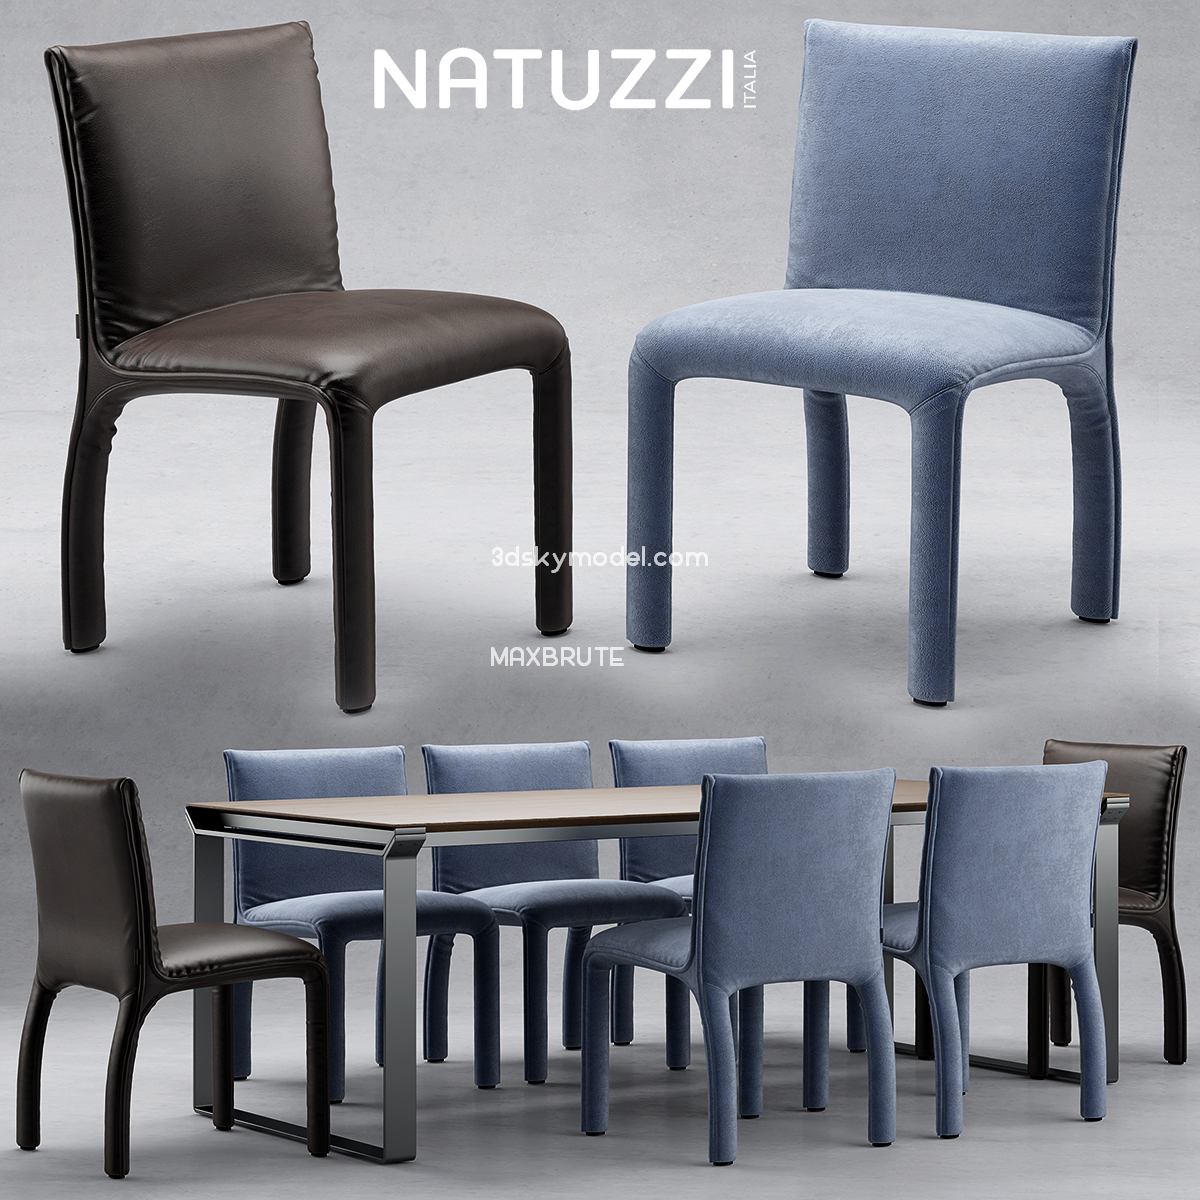 Natuzzi HEDI chair and table 3dmodel 3dsmax